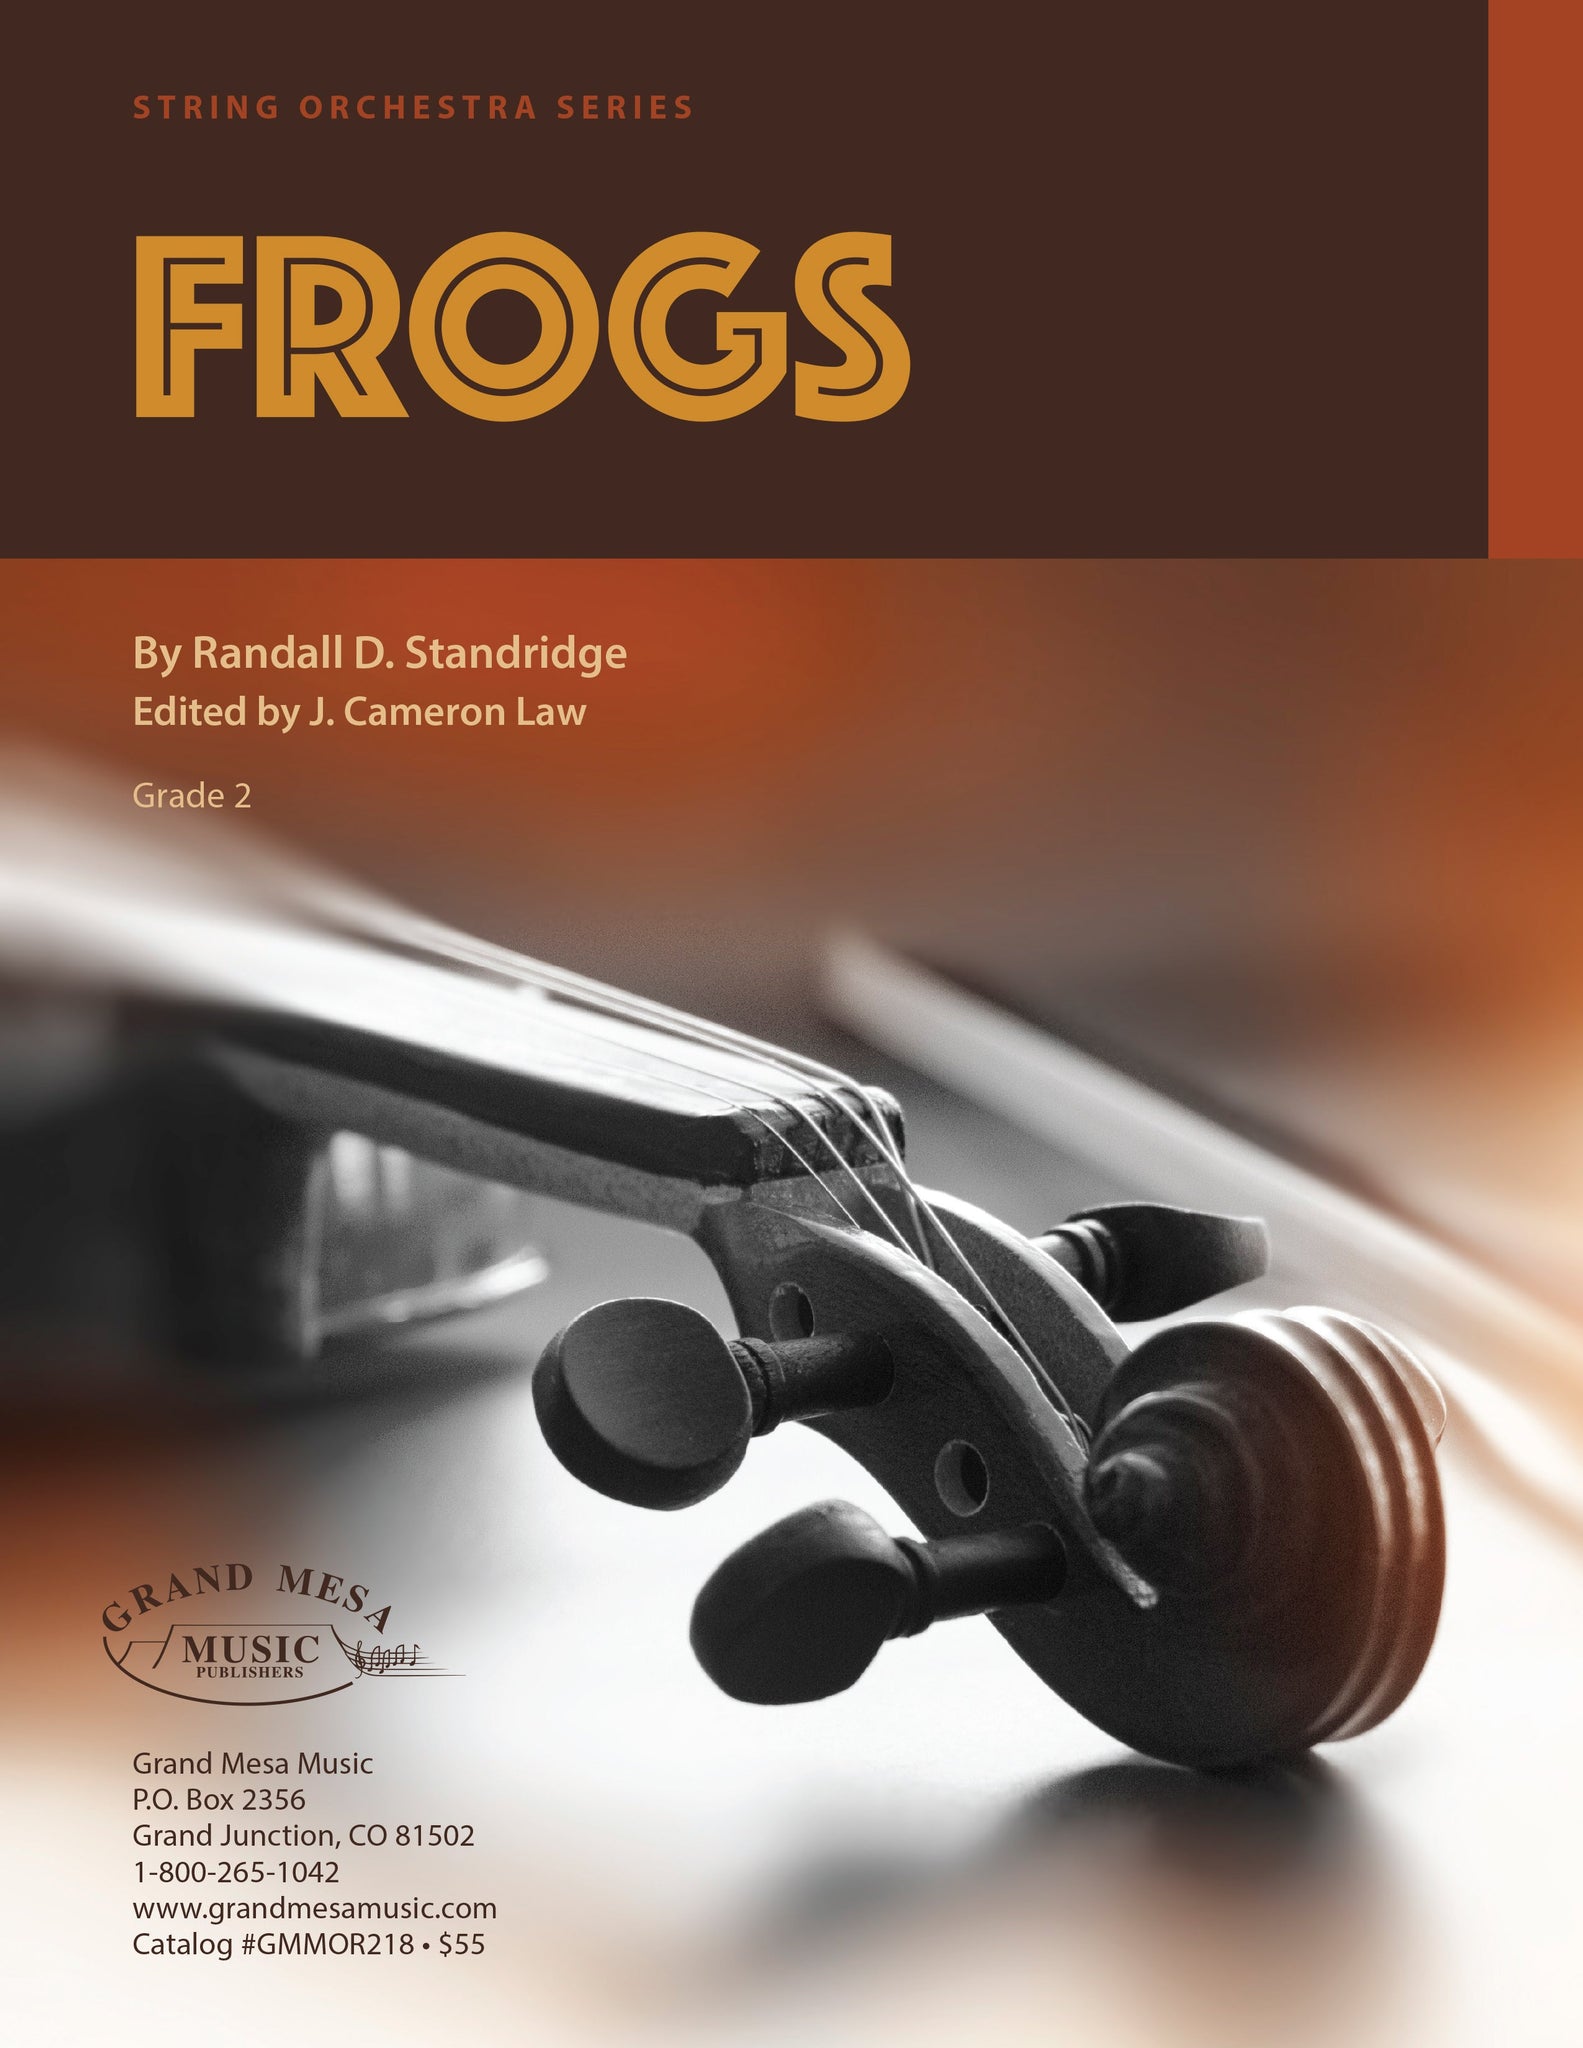 Strings sheet music cover of Frogs for String Orchestra, composed by Randall D. Standridge.